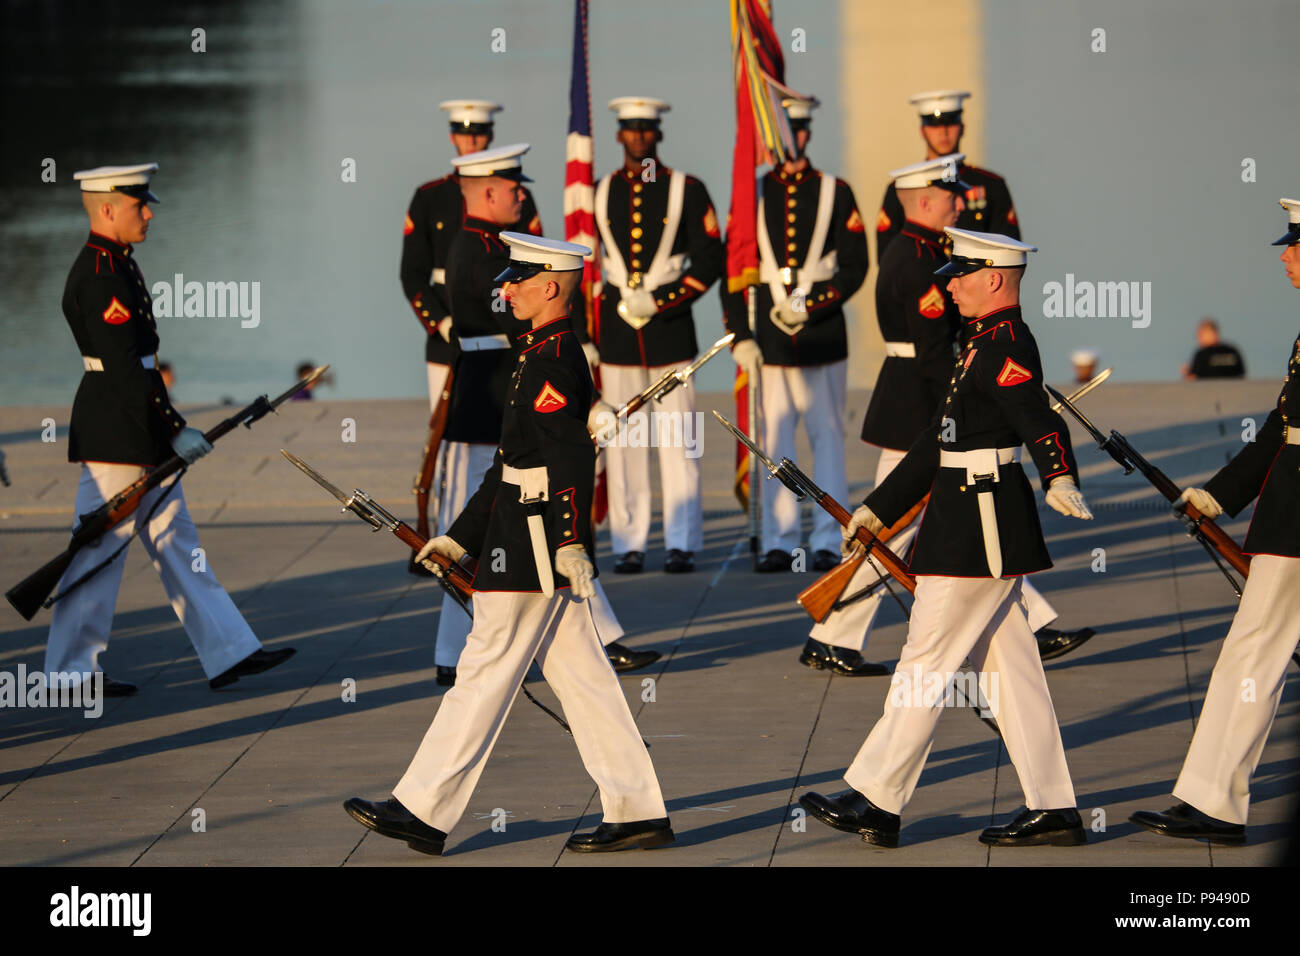 Marines with the U.S. Marine Corps Silent Drill Platoon execute precision rifle drill movements during a Tuesday Sunset Parade at the Lincoln Memorial, Washington D.C., July 10, 2018. The guest of honor for the parade was the former Vice President of the U.S., Joe Biden, and the hosting official was the Staff Judge Advocate to the Commandant of the Marine Corps, Maj. Gen. John R. Ewers Jr. (Official Marine Corps photo by Cpl. Damon Mclean/Released) Stock Photo